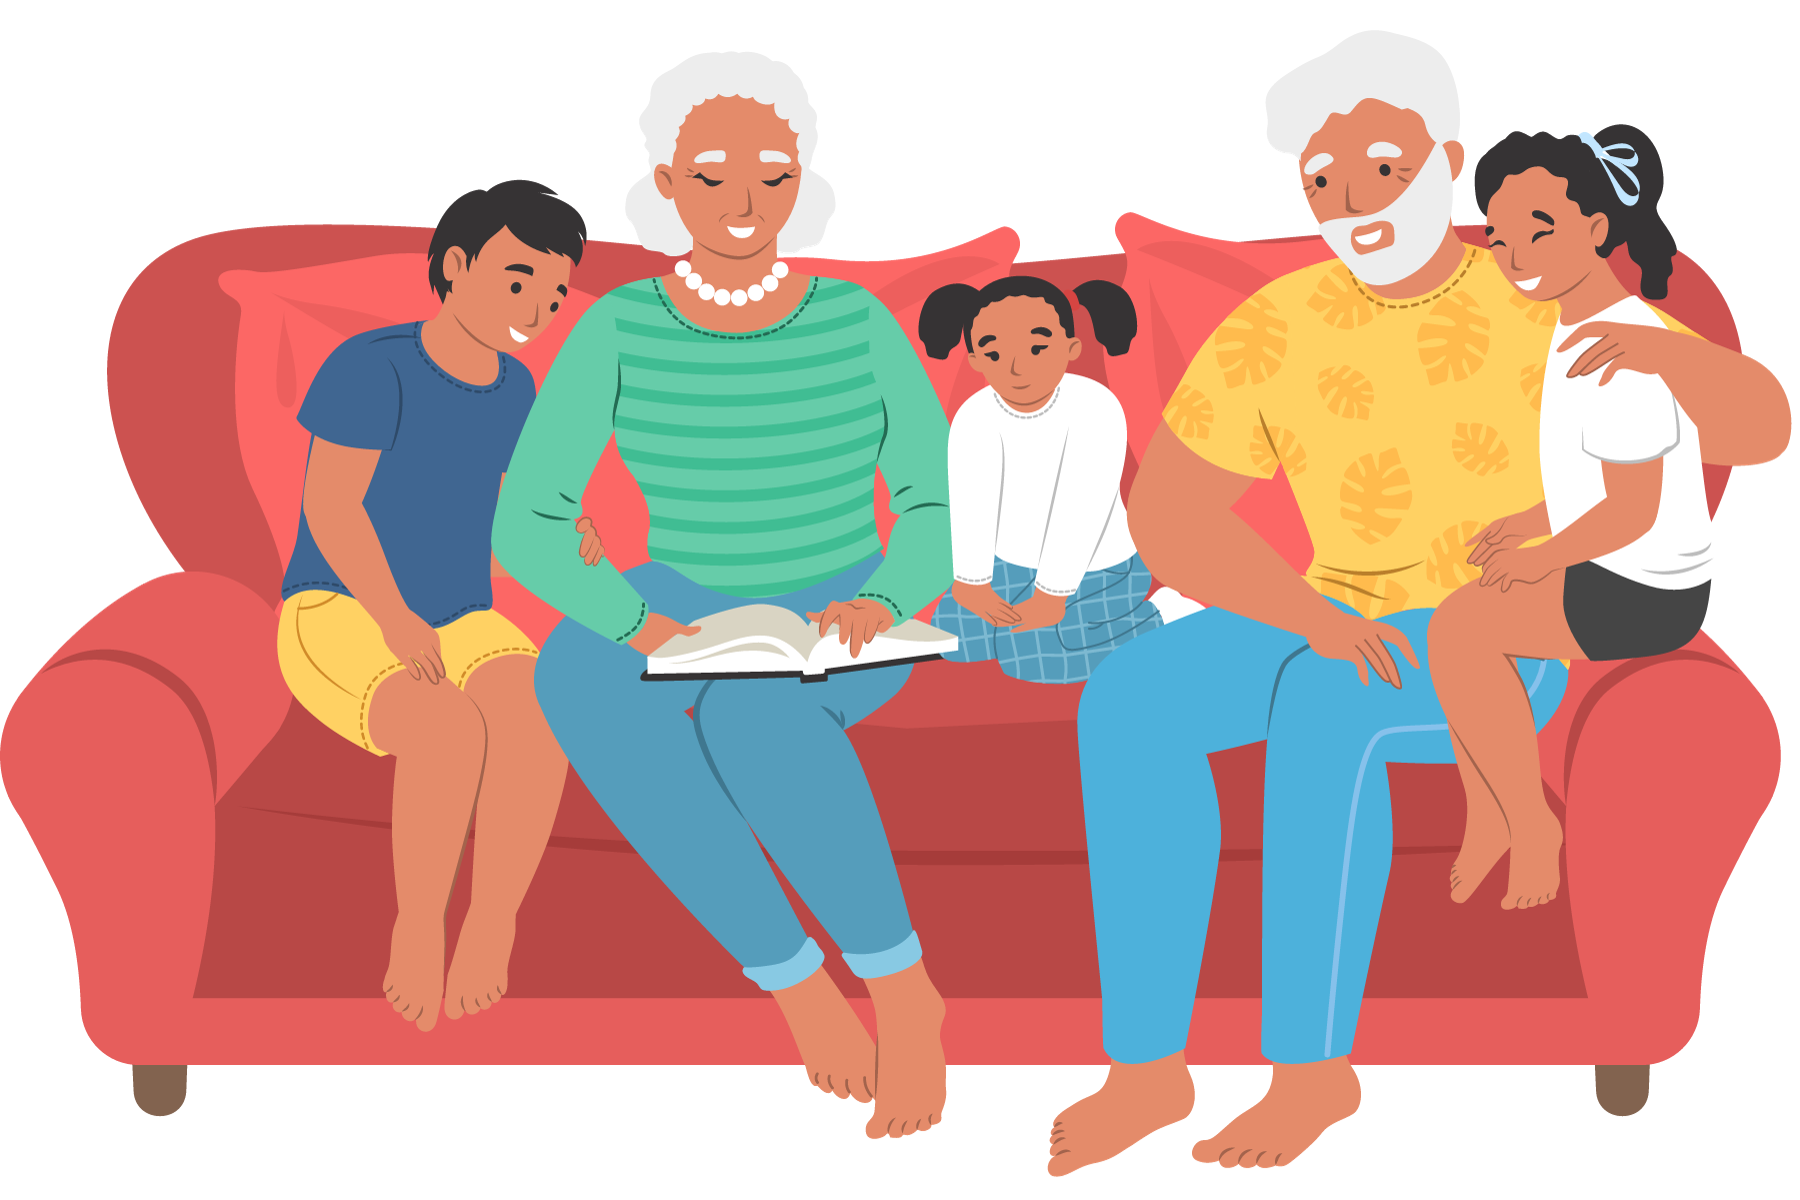 Graphic depiction of older adults reading with younger children on a couch.